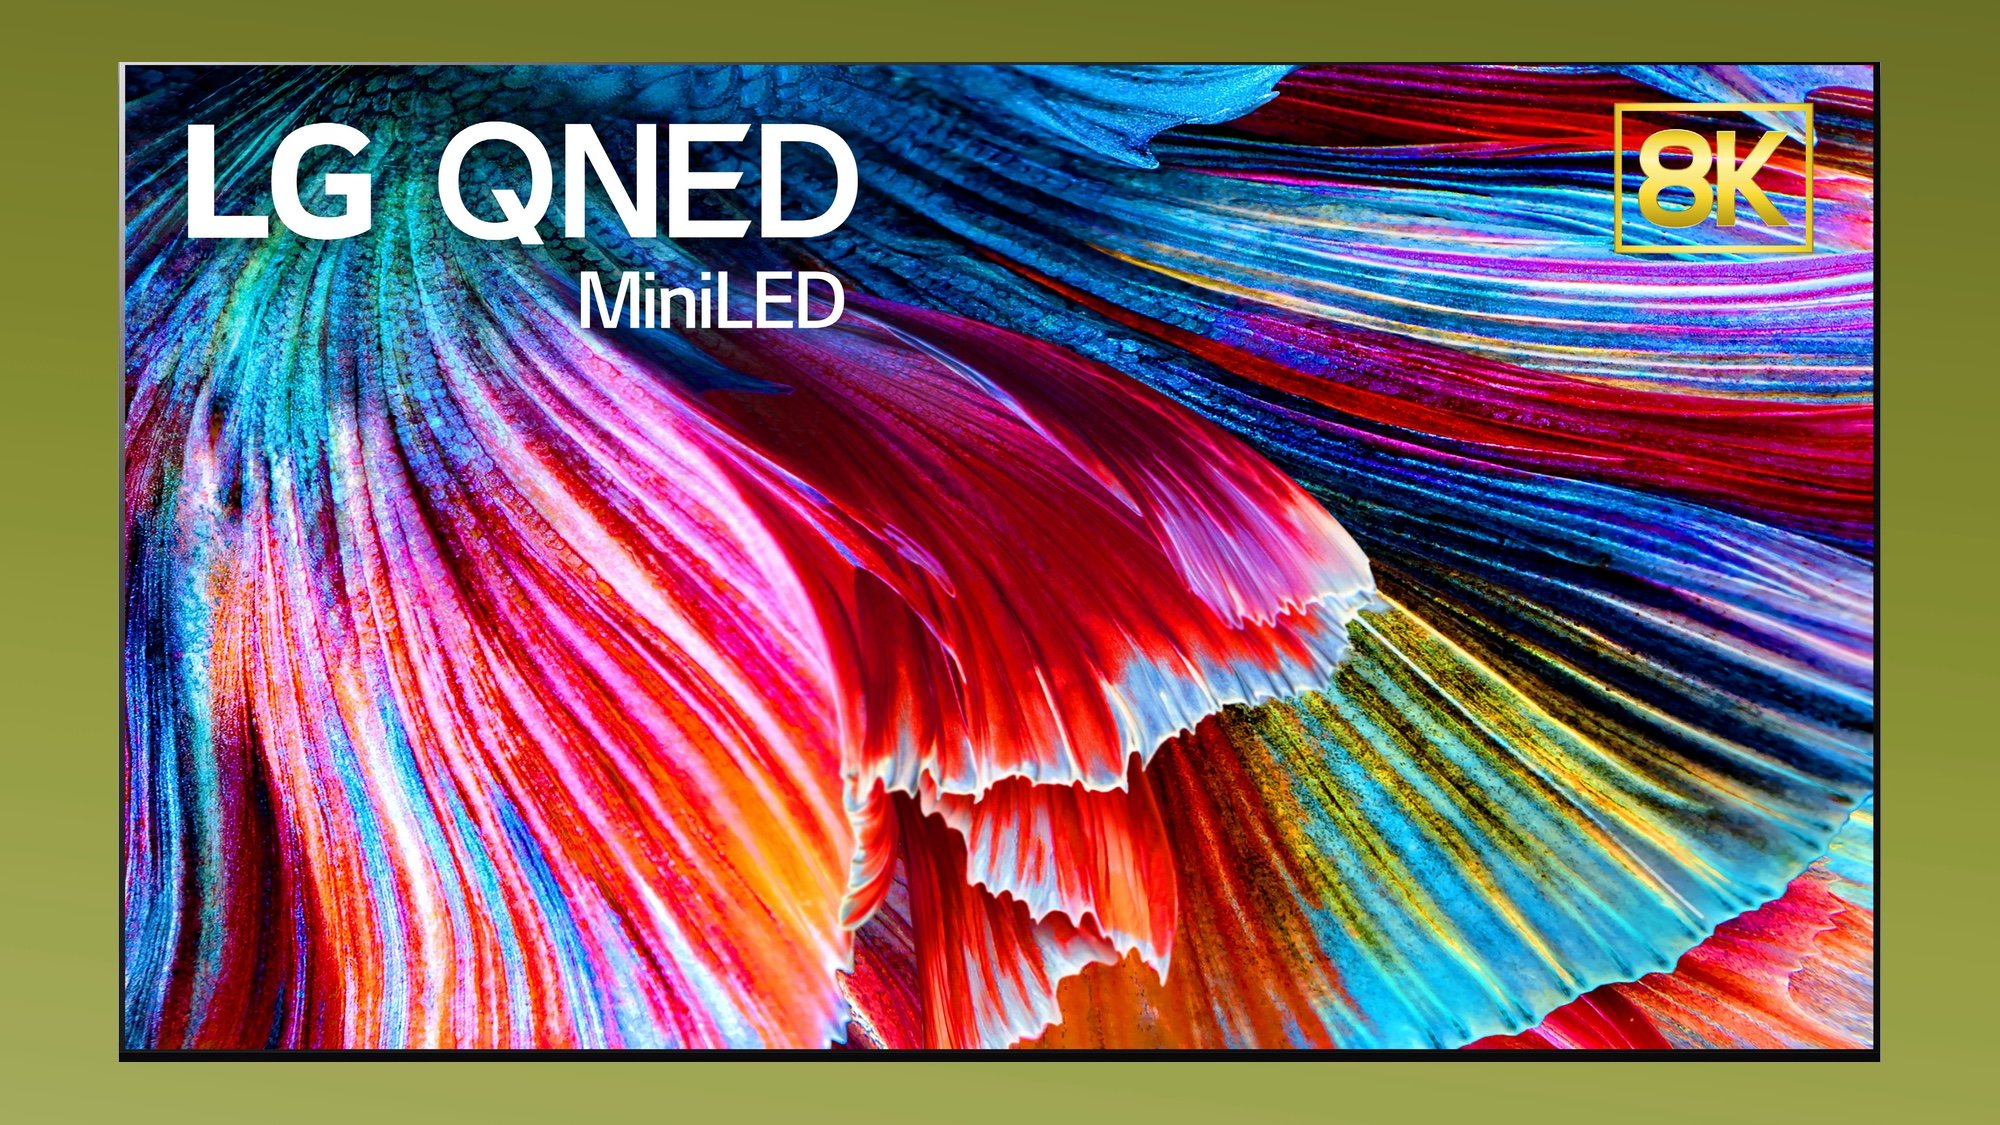 LG QNED TVs to feature up to 30,000 tiny LEDs behind the display